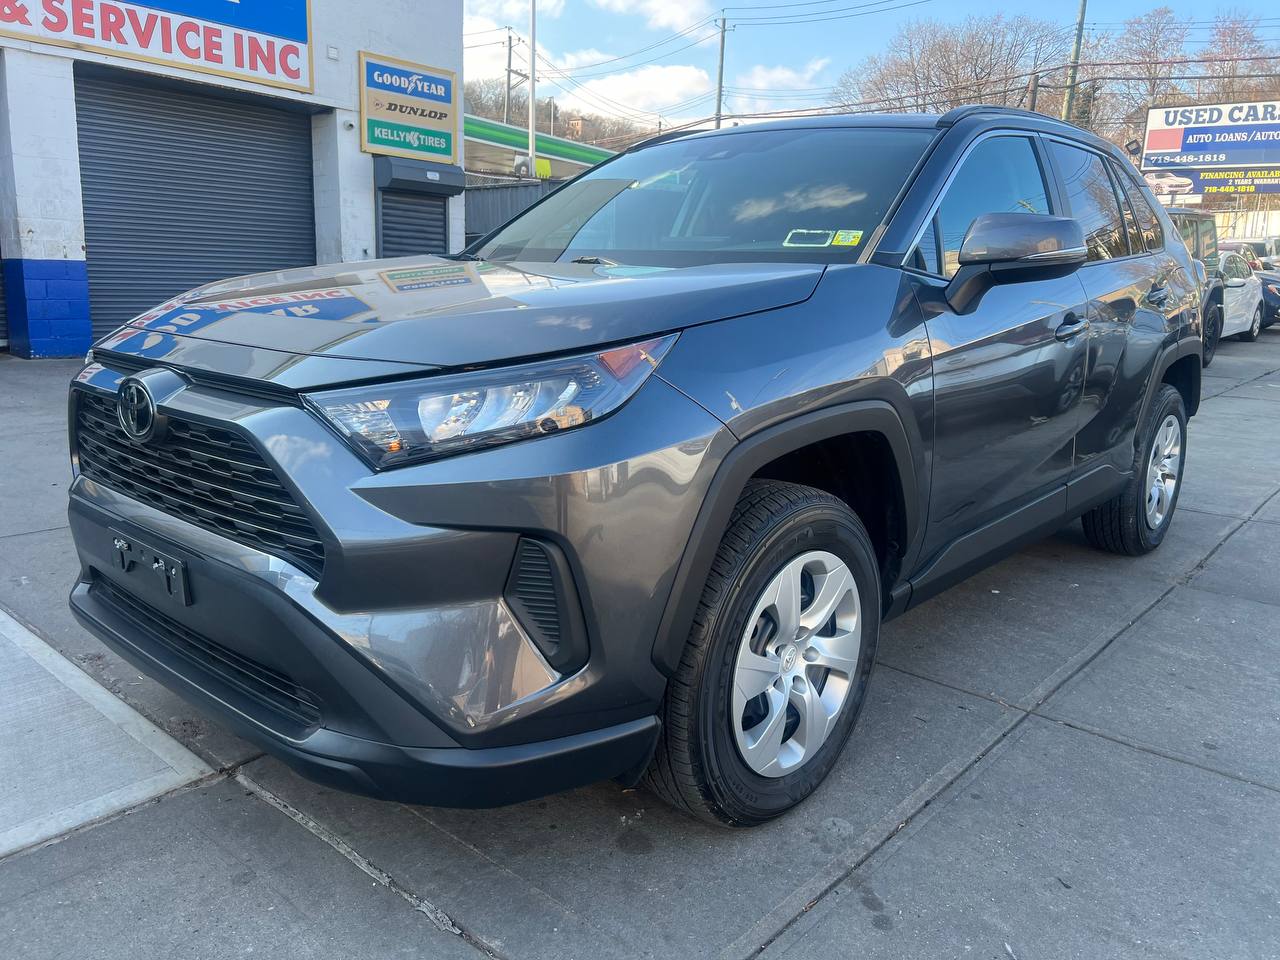 Used Car - 2021 Toyota RAV4 LE AWD for Sale in Staten Island, NY